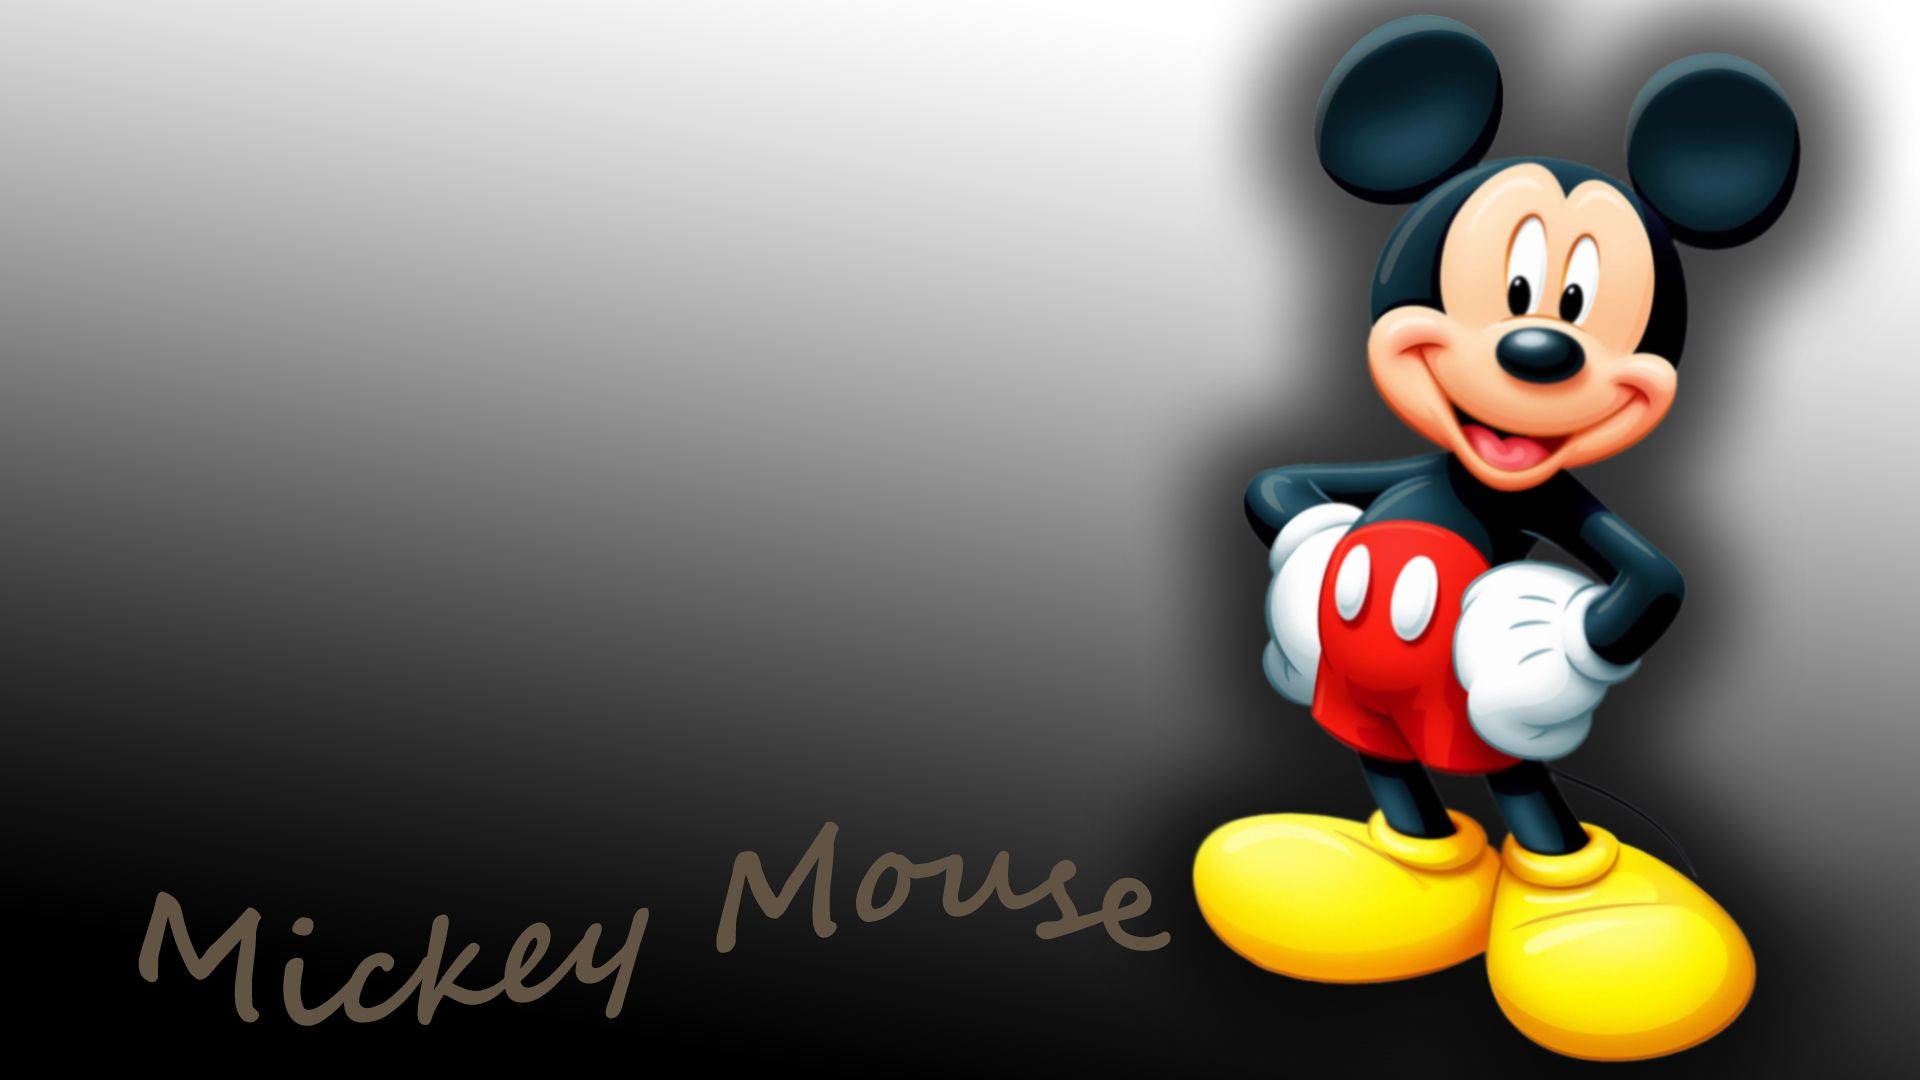 Download Mickey Mouse Wallpaper HD Picture #63522 - Download Page ...